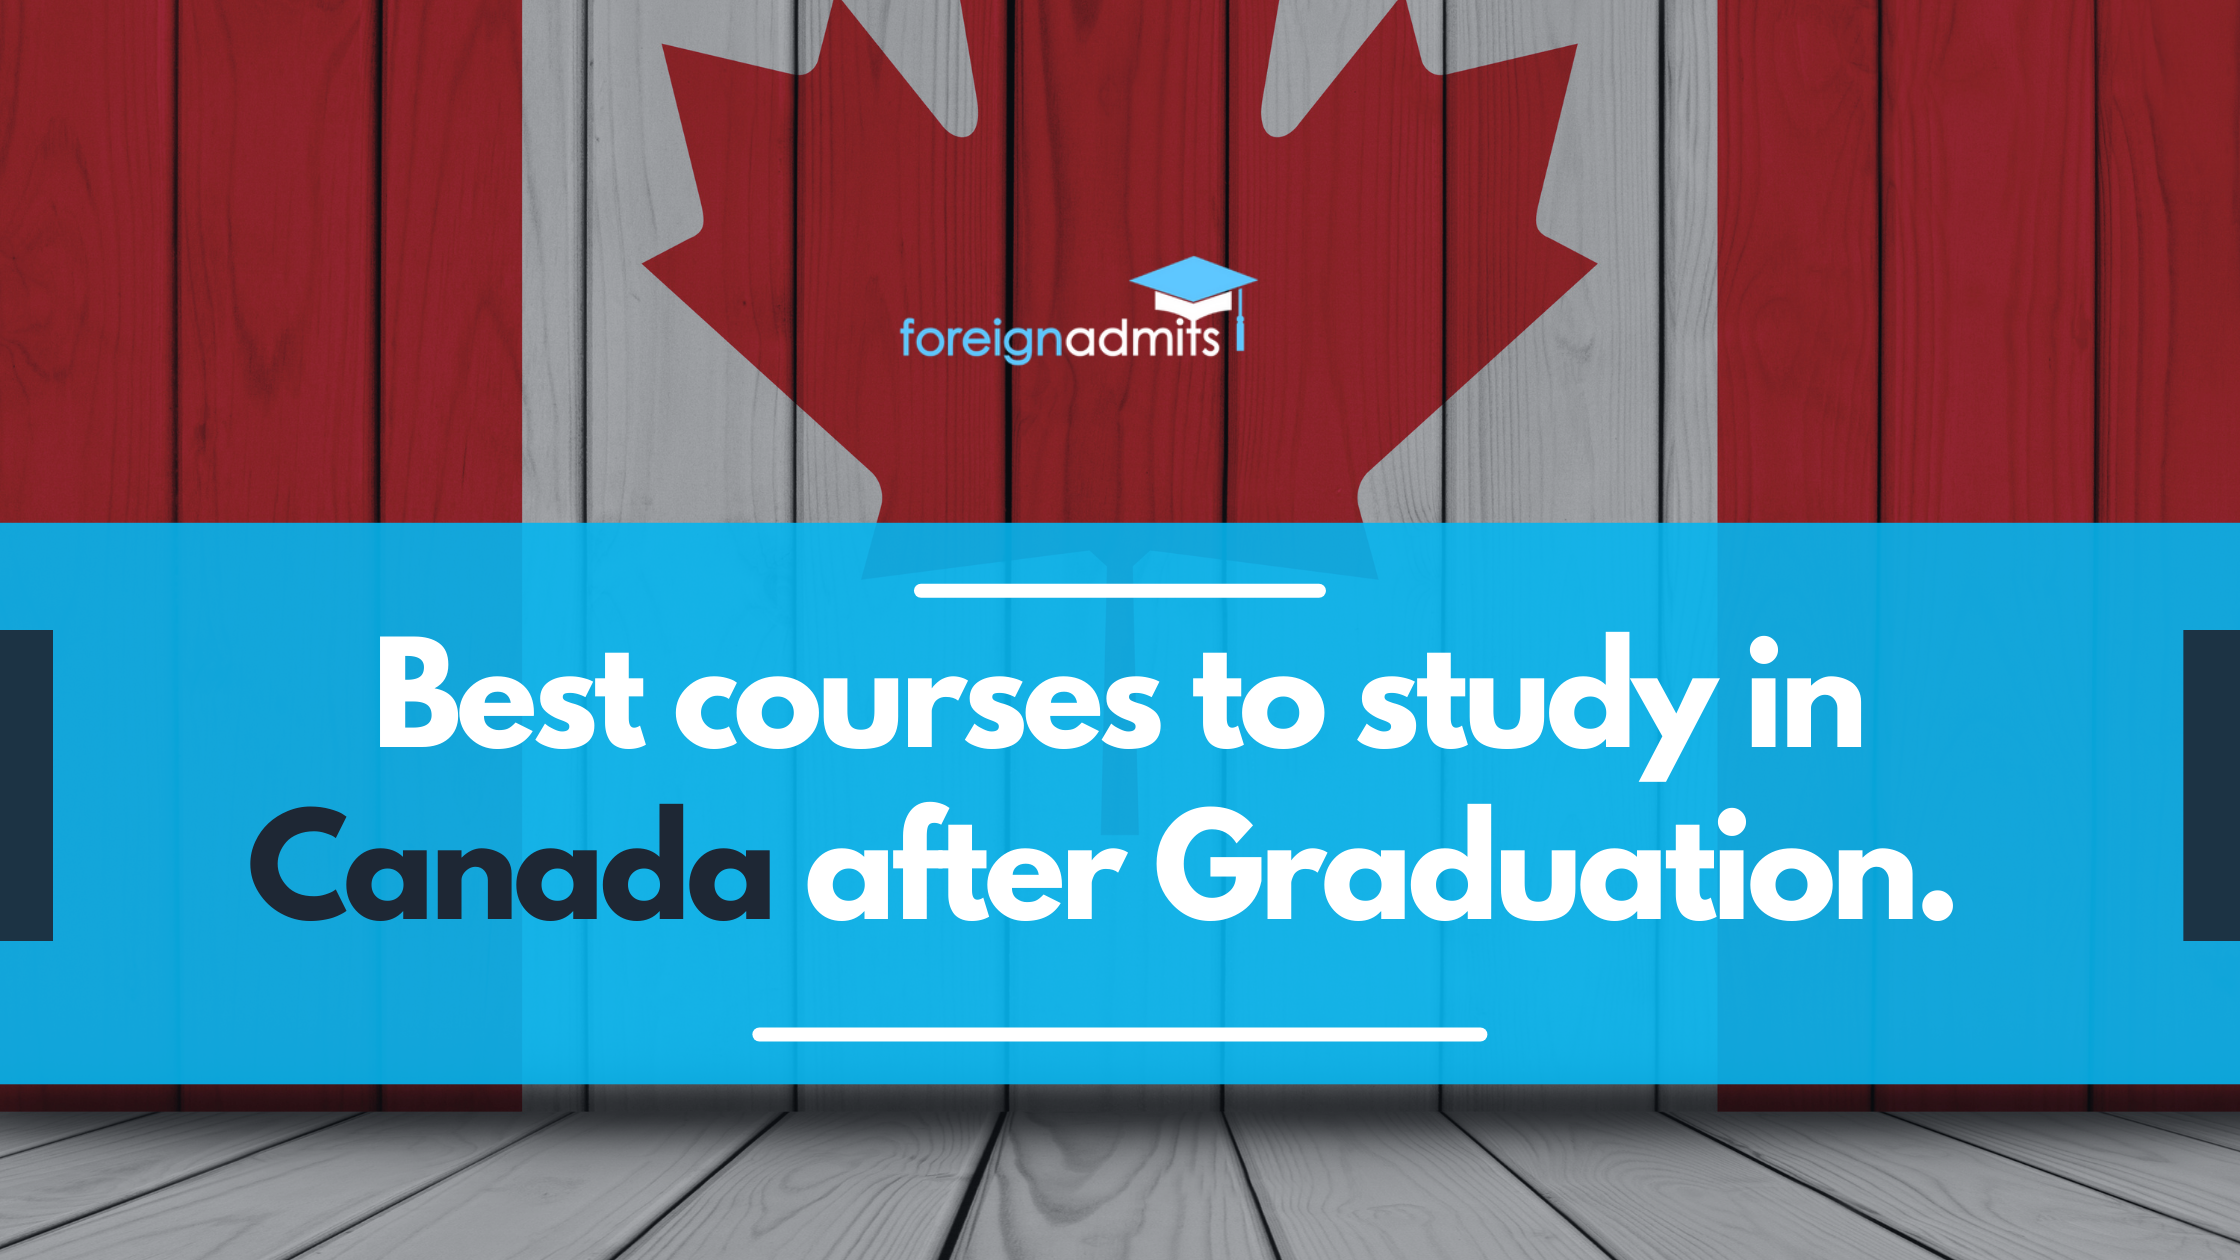 Best courses to study in Canada after Graduation